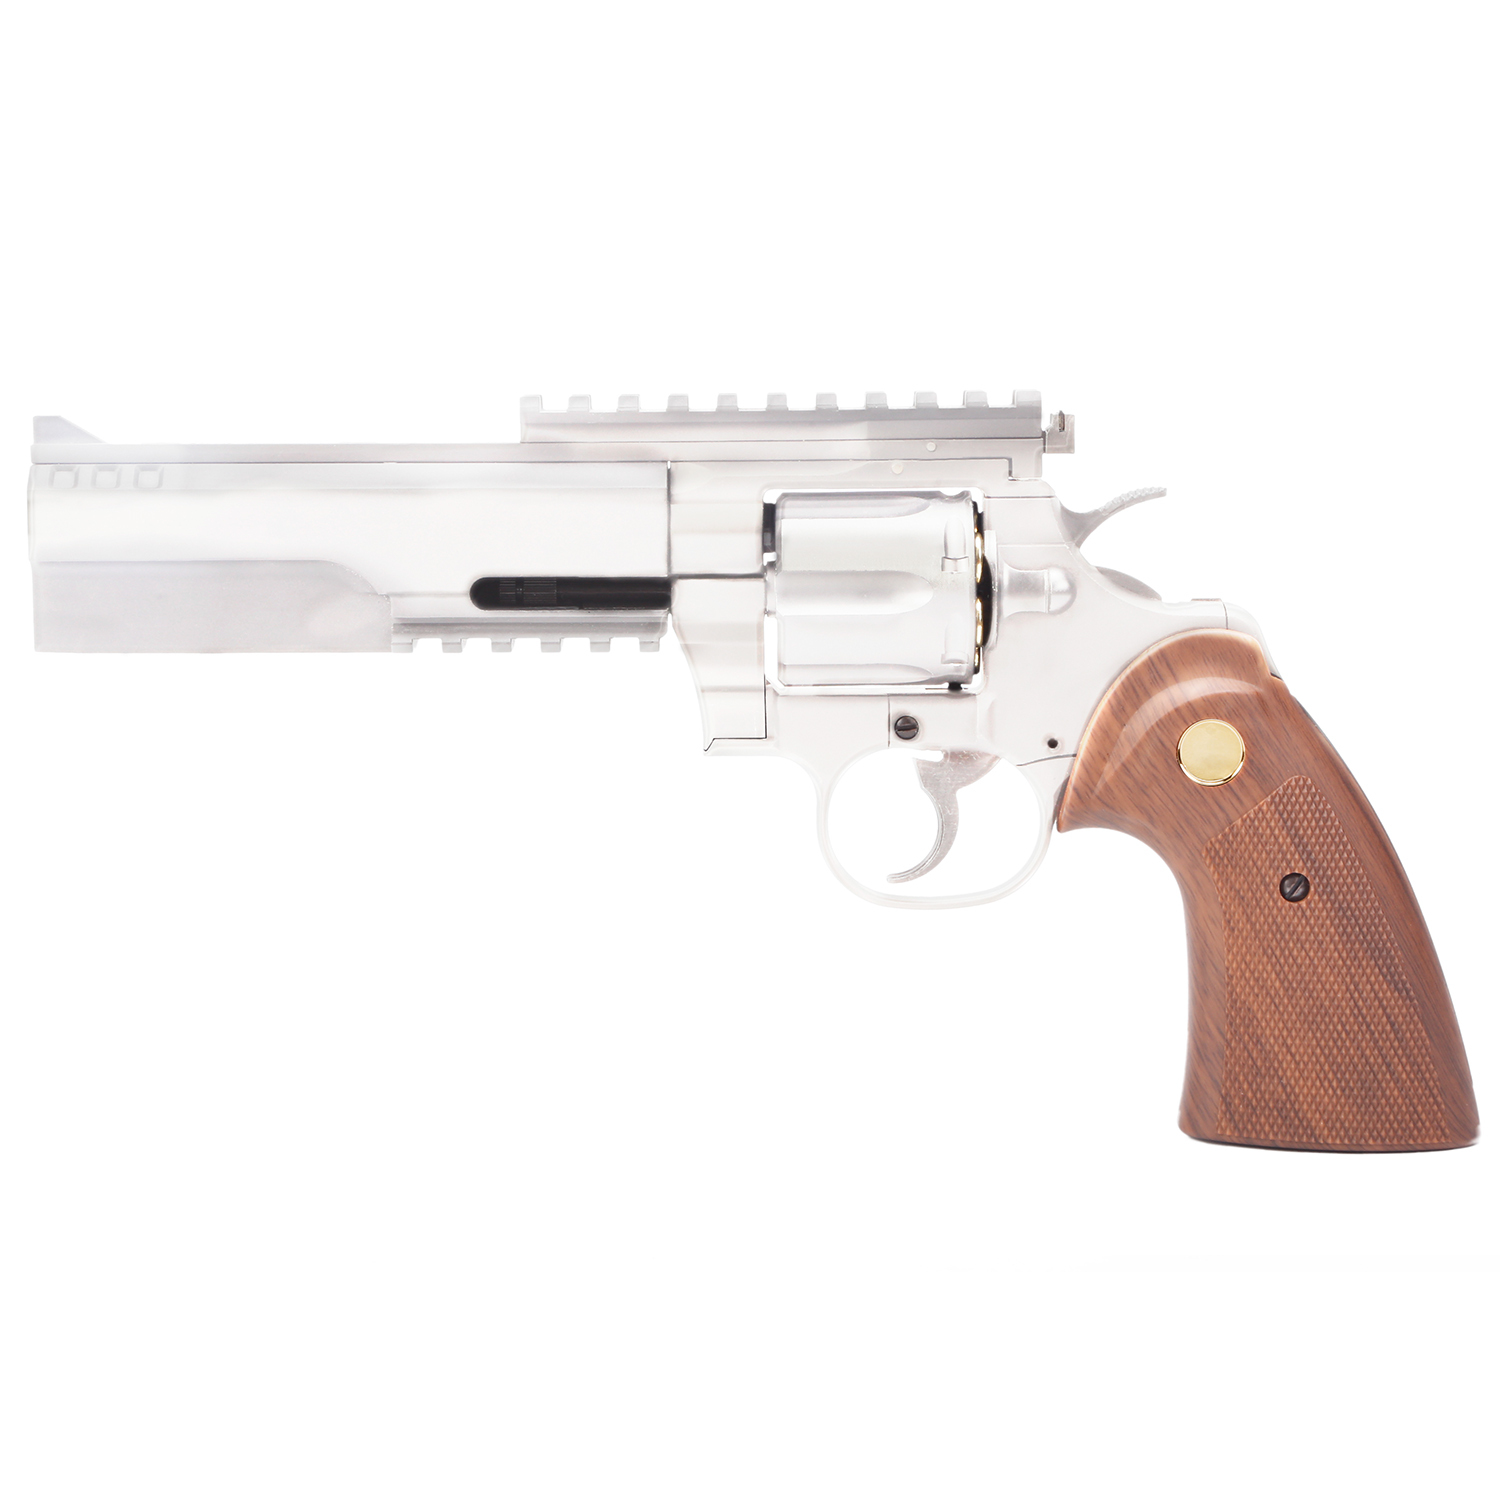 King Arms Python 357 Evil (Gas version) - Silver – King Arms Store